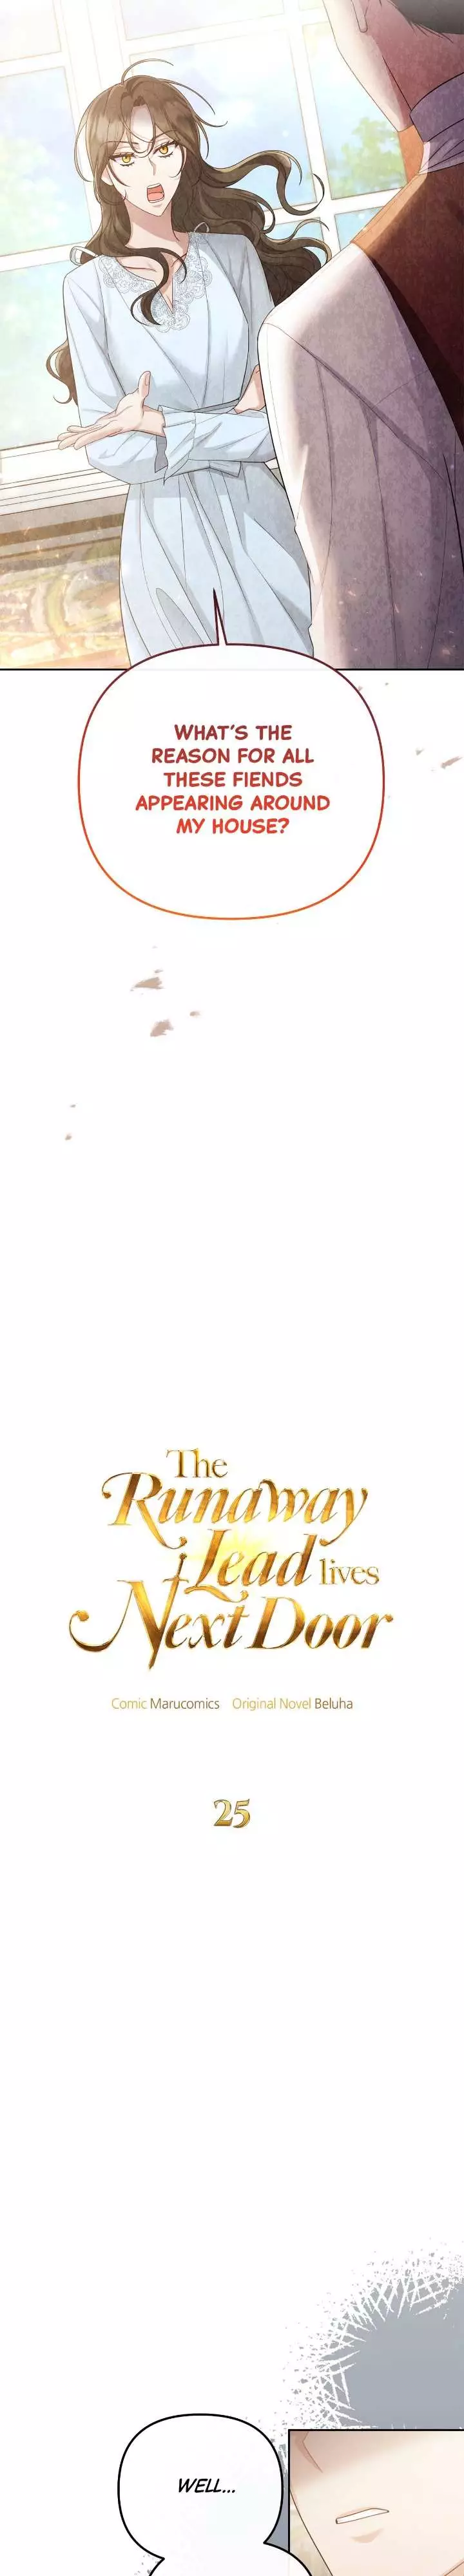 The Runaway Lead Lives Next Door - 25 page 9-e745cad3